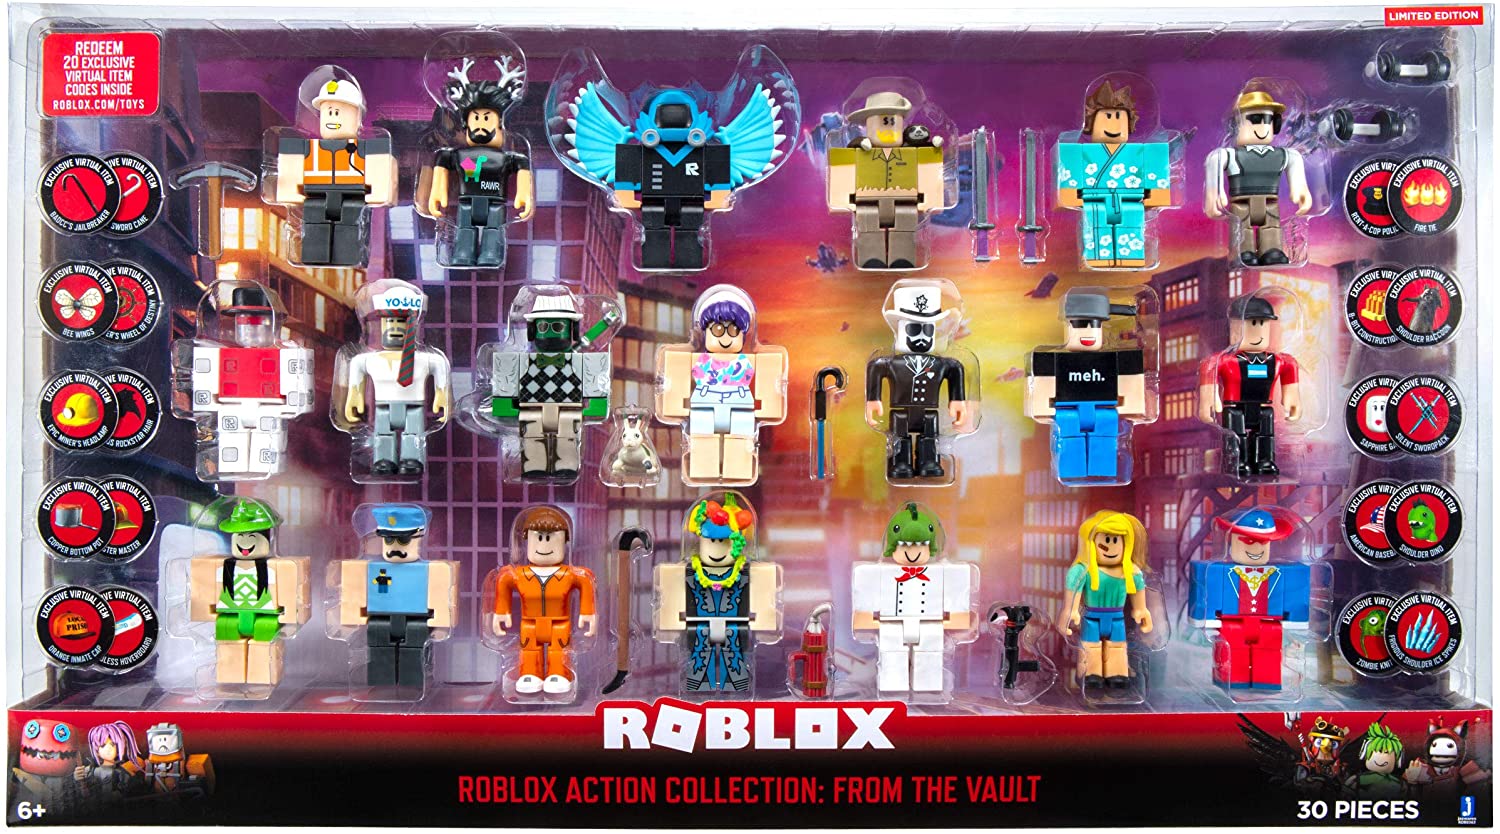 New How To Redeem Roblox Toy Codes July 2021 Super Easy - www.roblox.comtoys reedeem